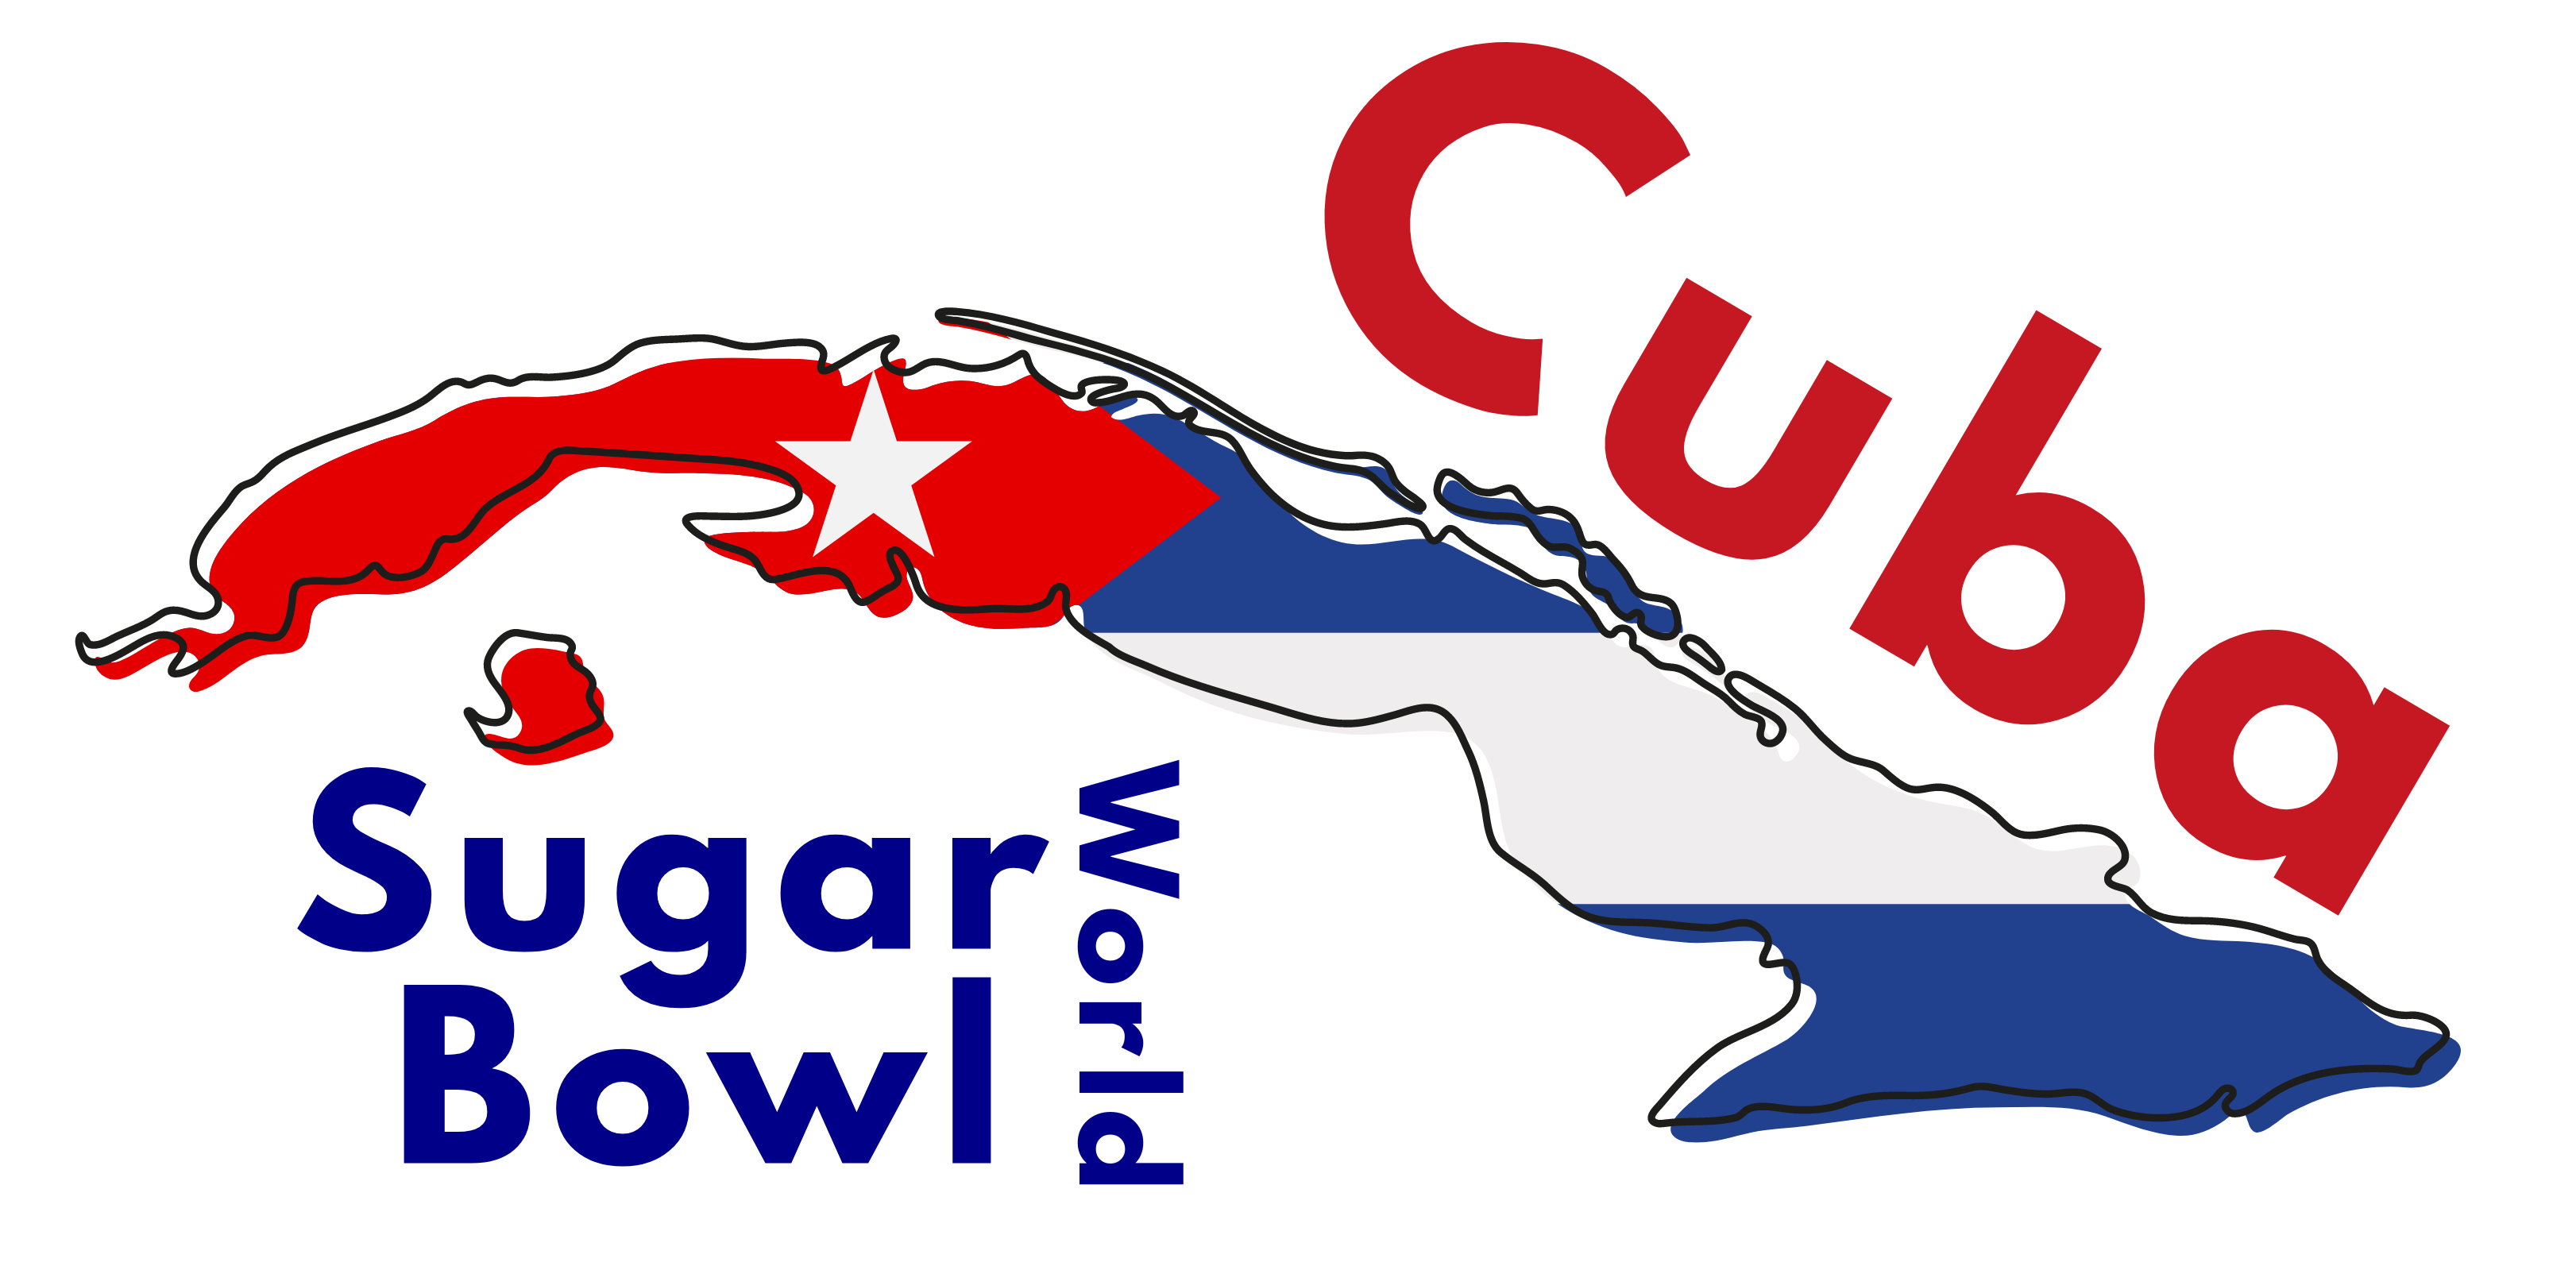 Cuba is the Sugar Bowl of the world. WHY?